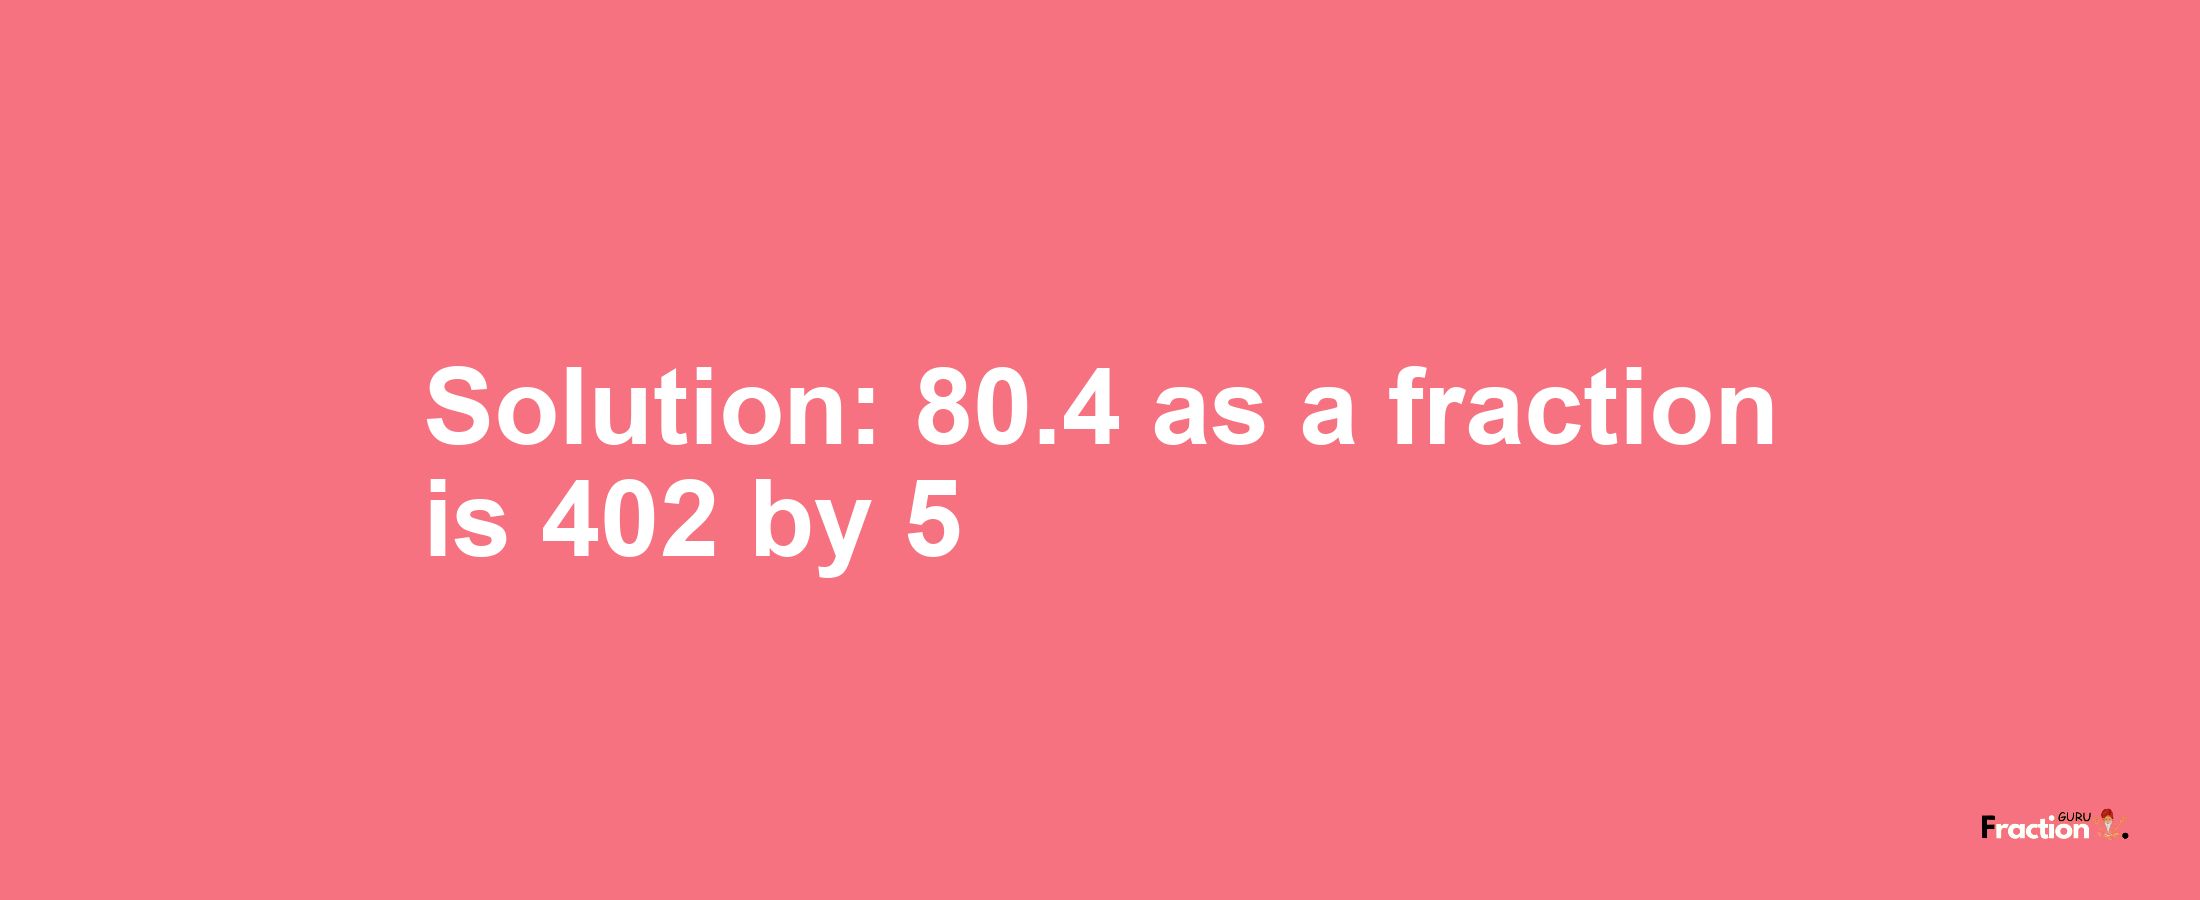 Solution:80.4 as a fraction is 402/5